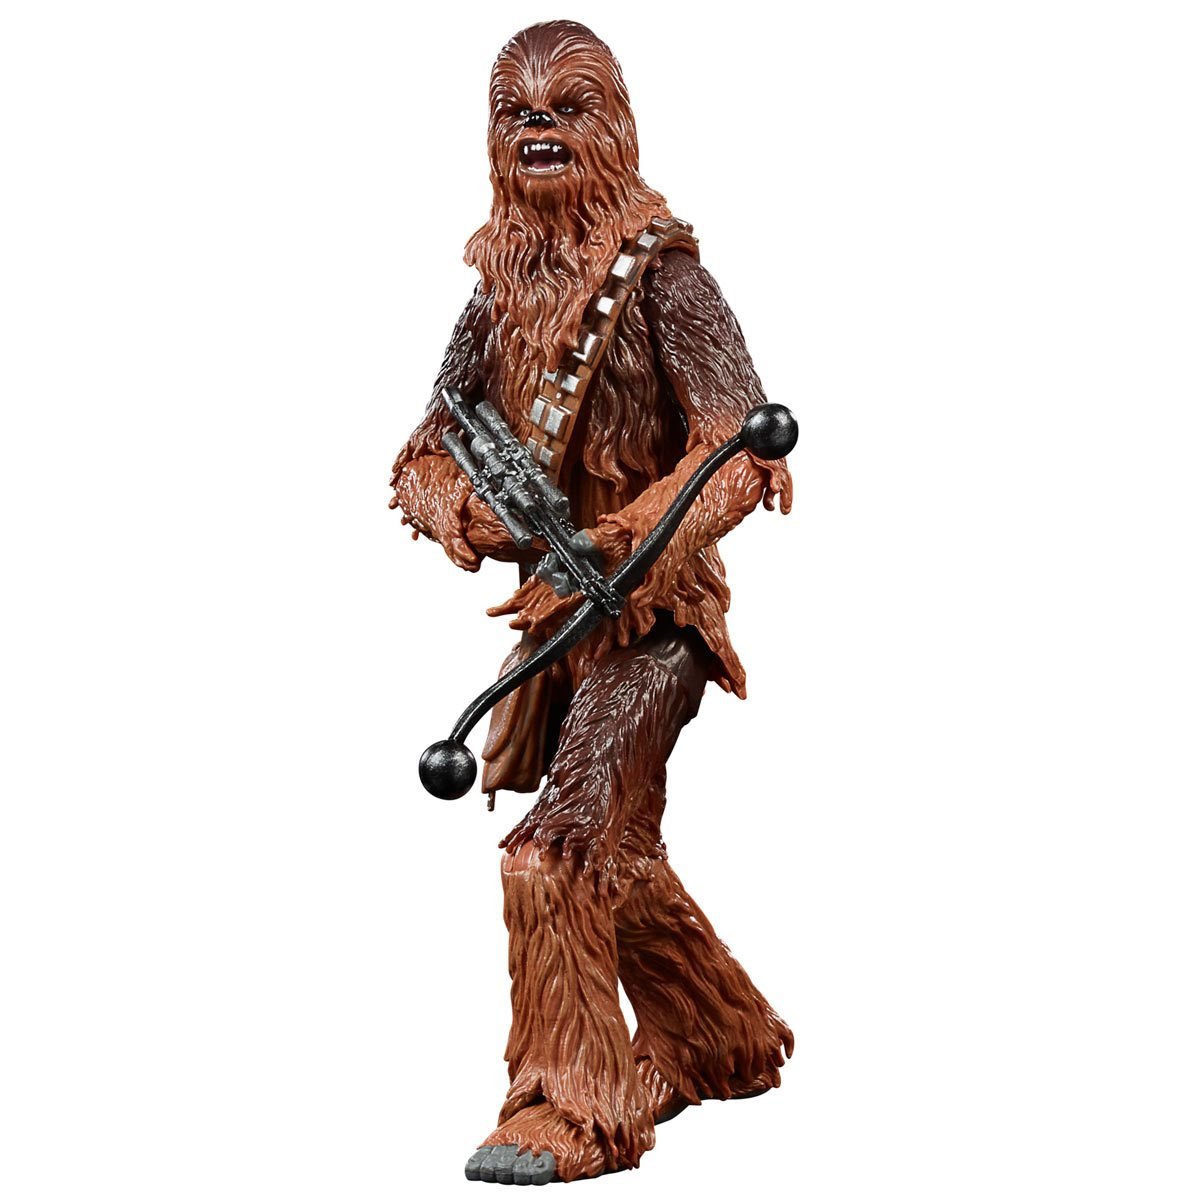 HASBRO Star Wars The Black Series Archive Chewbacca (The Force Awakens) 6-Inch Action Figure